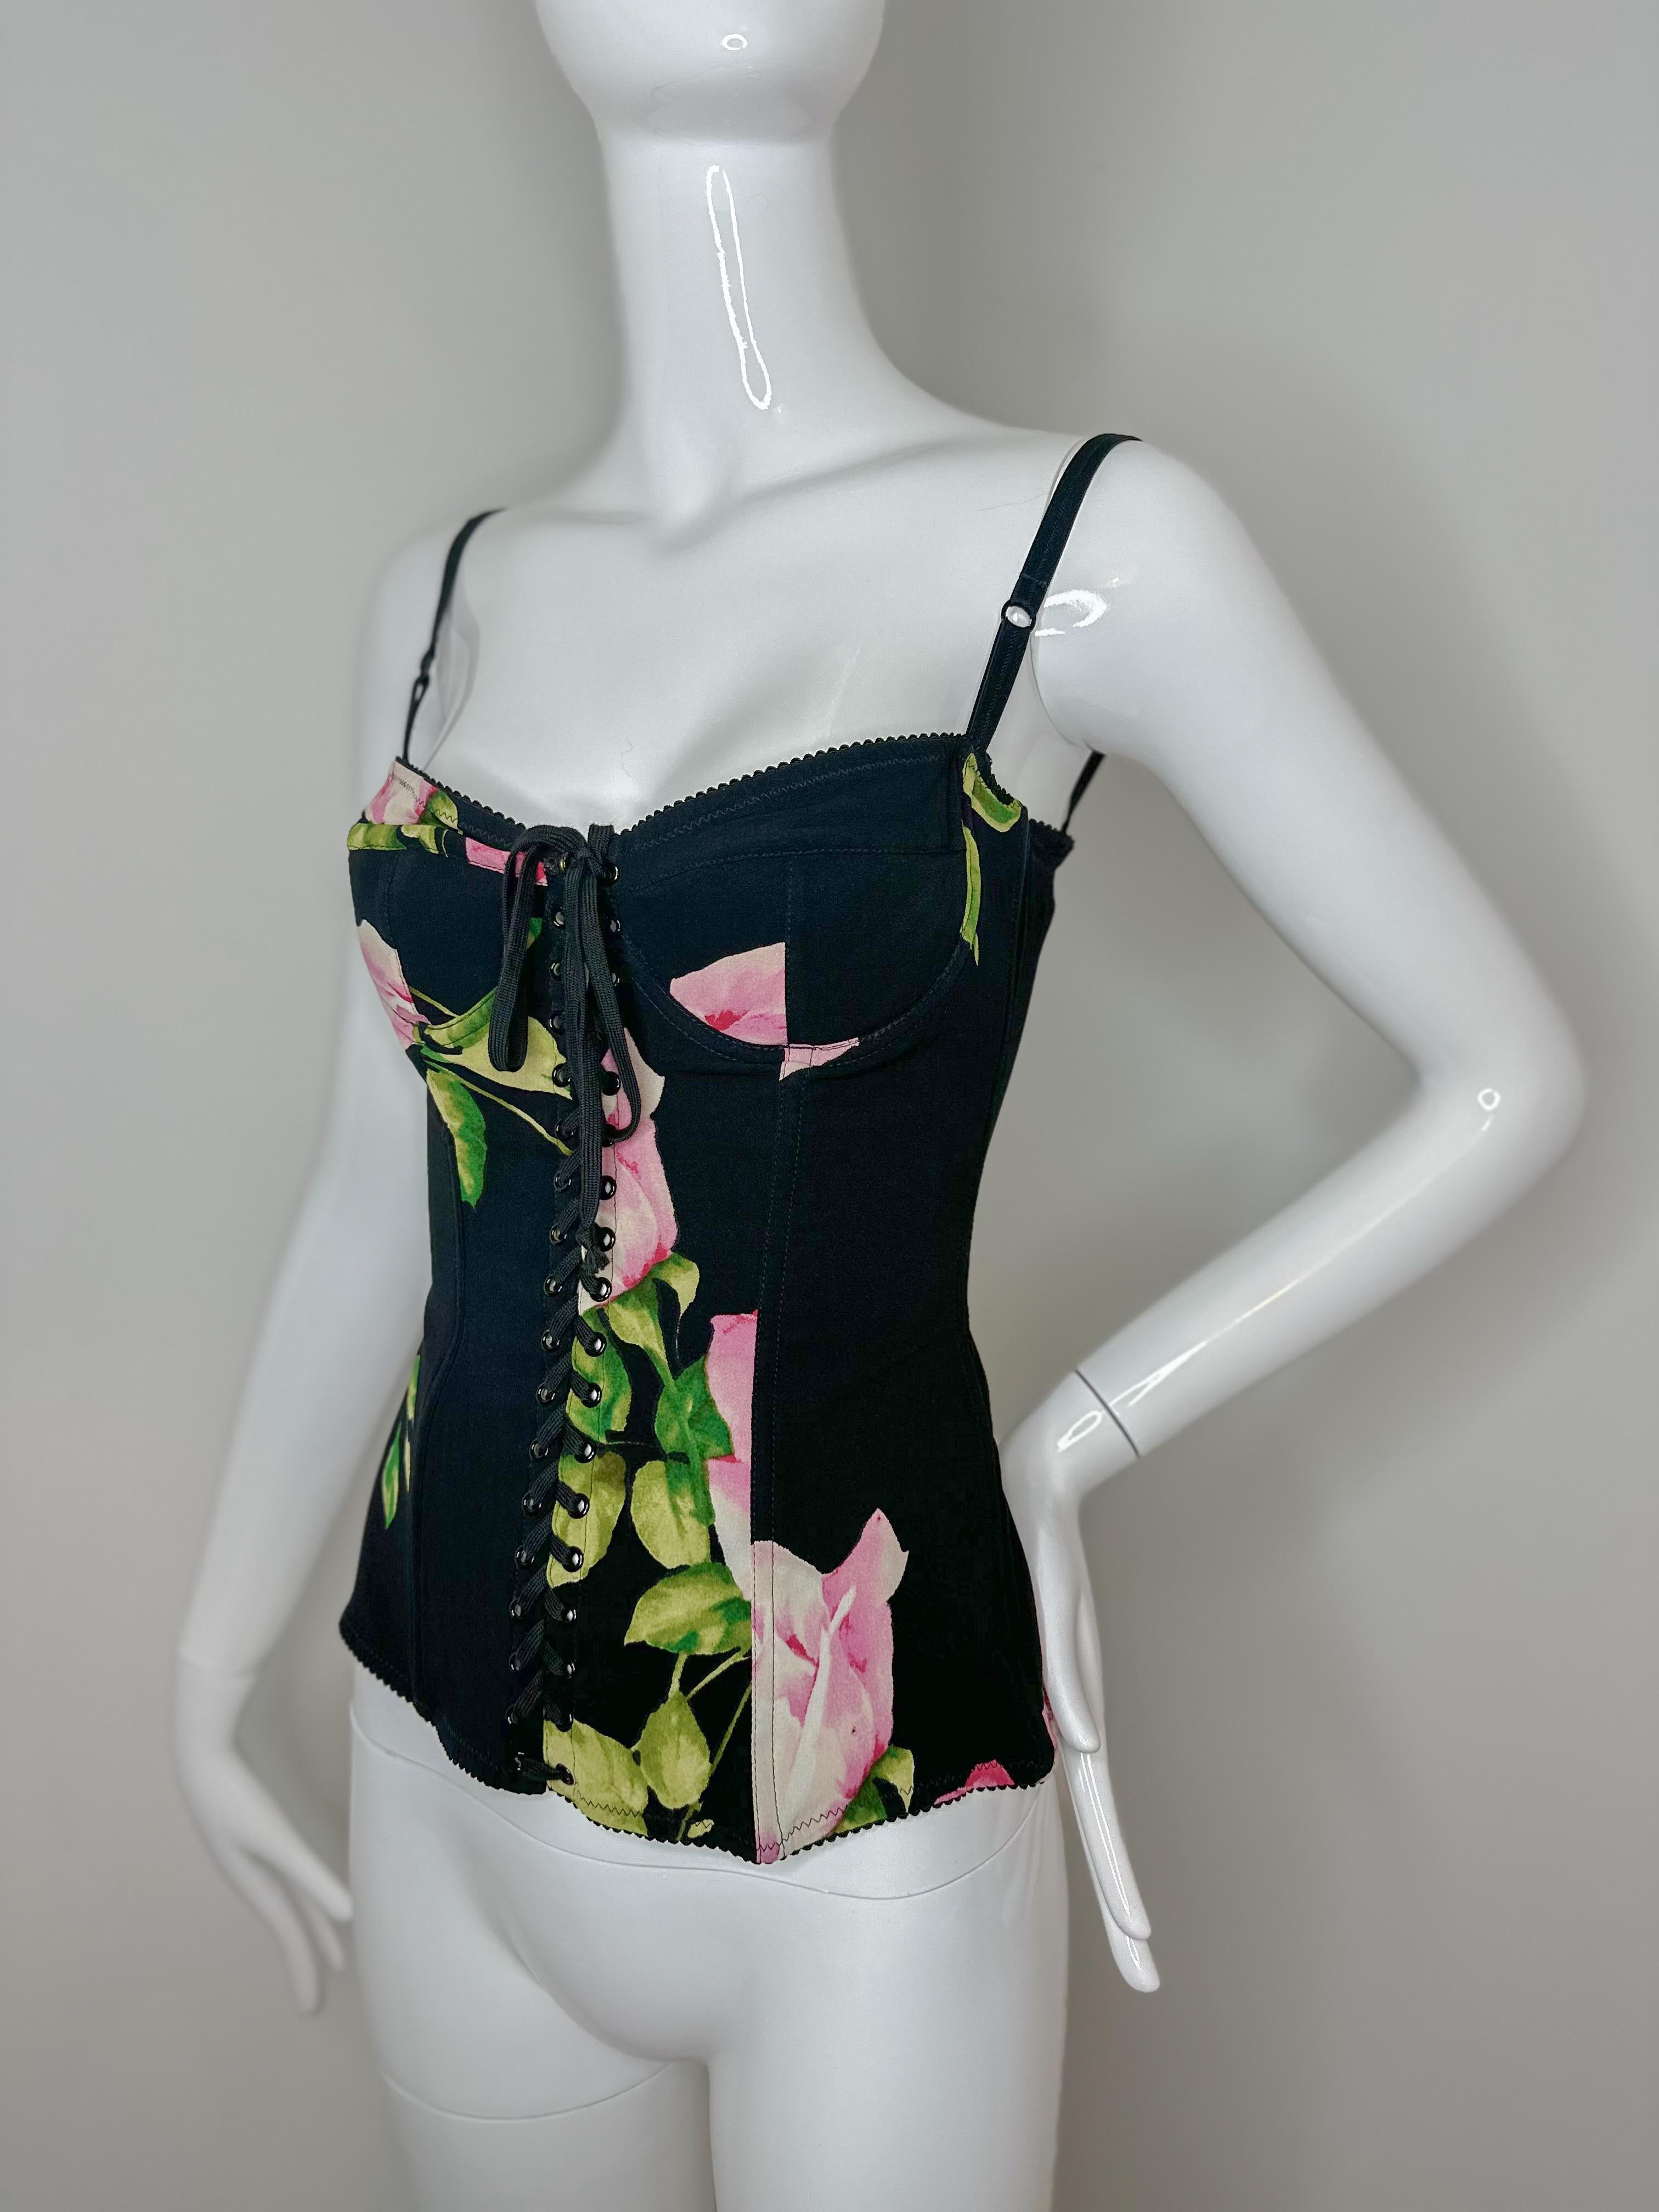 Dolce Gabbana 2000’s silk floral bustier top In Good Condition For Sale In Annandale, VA